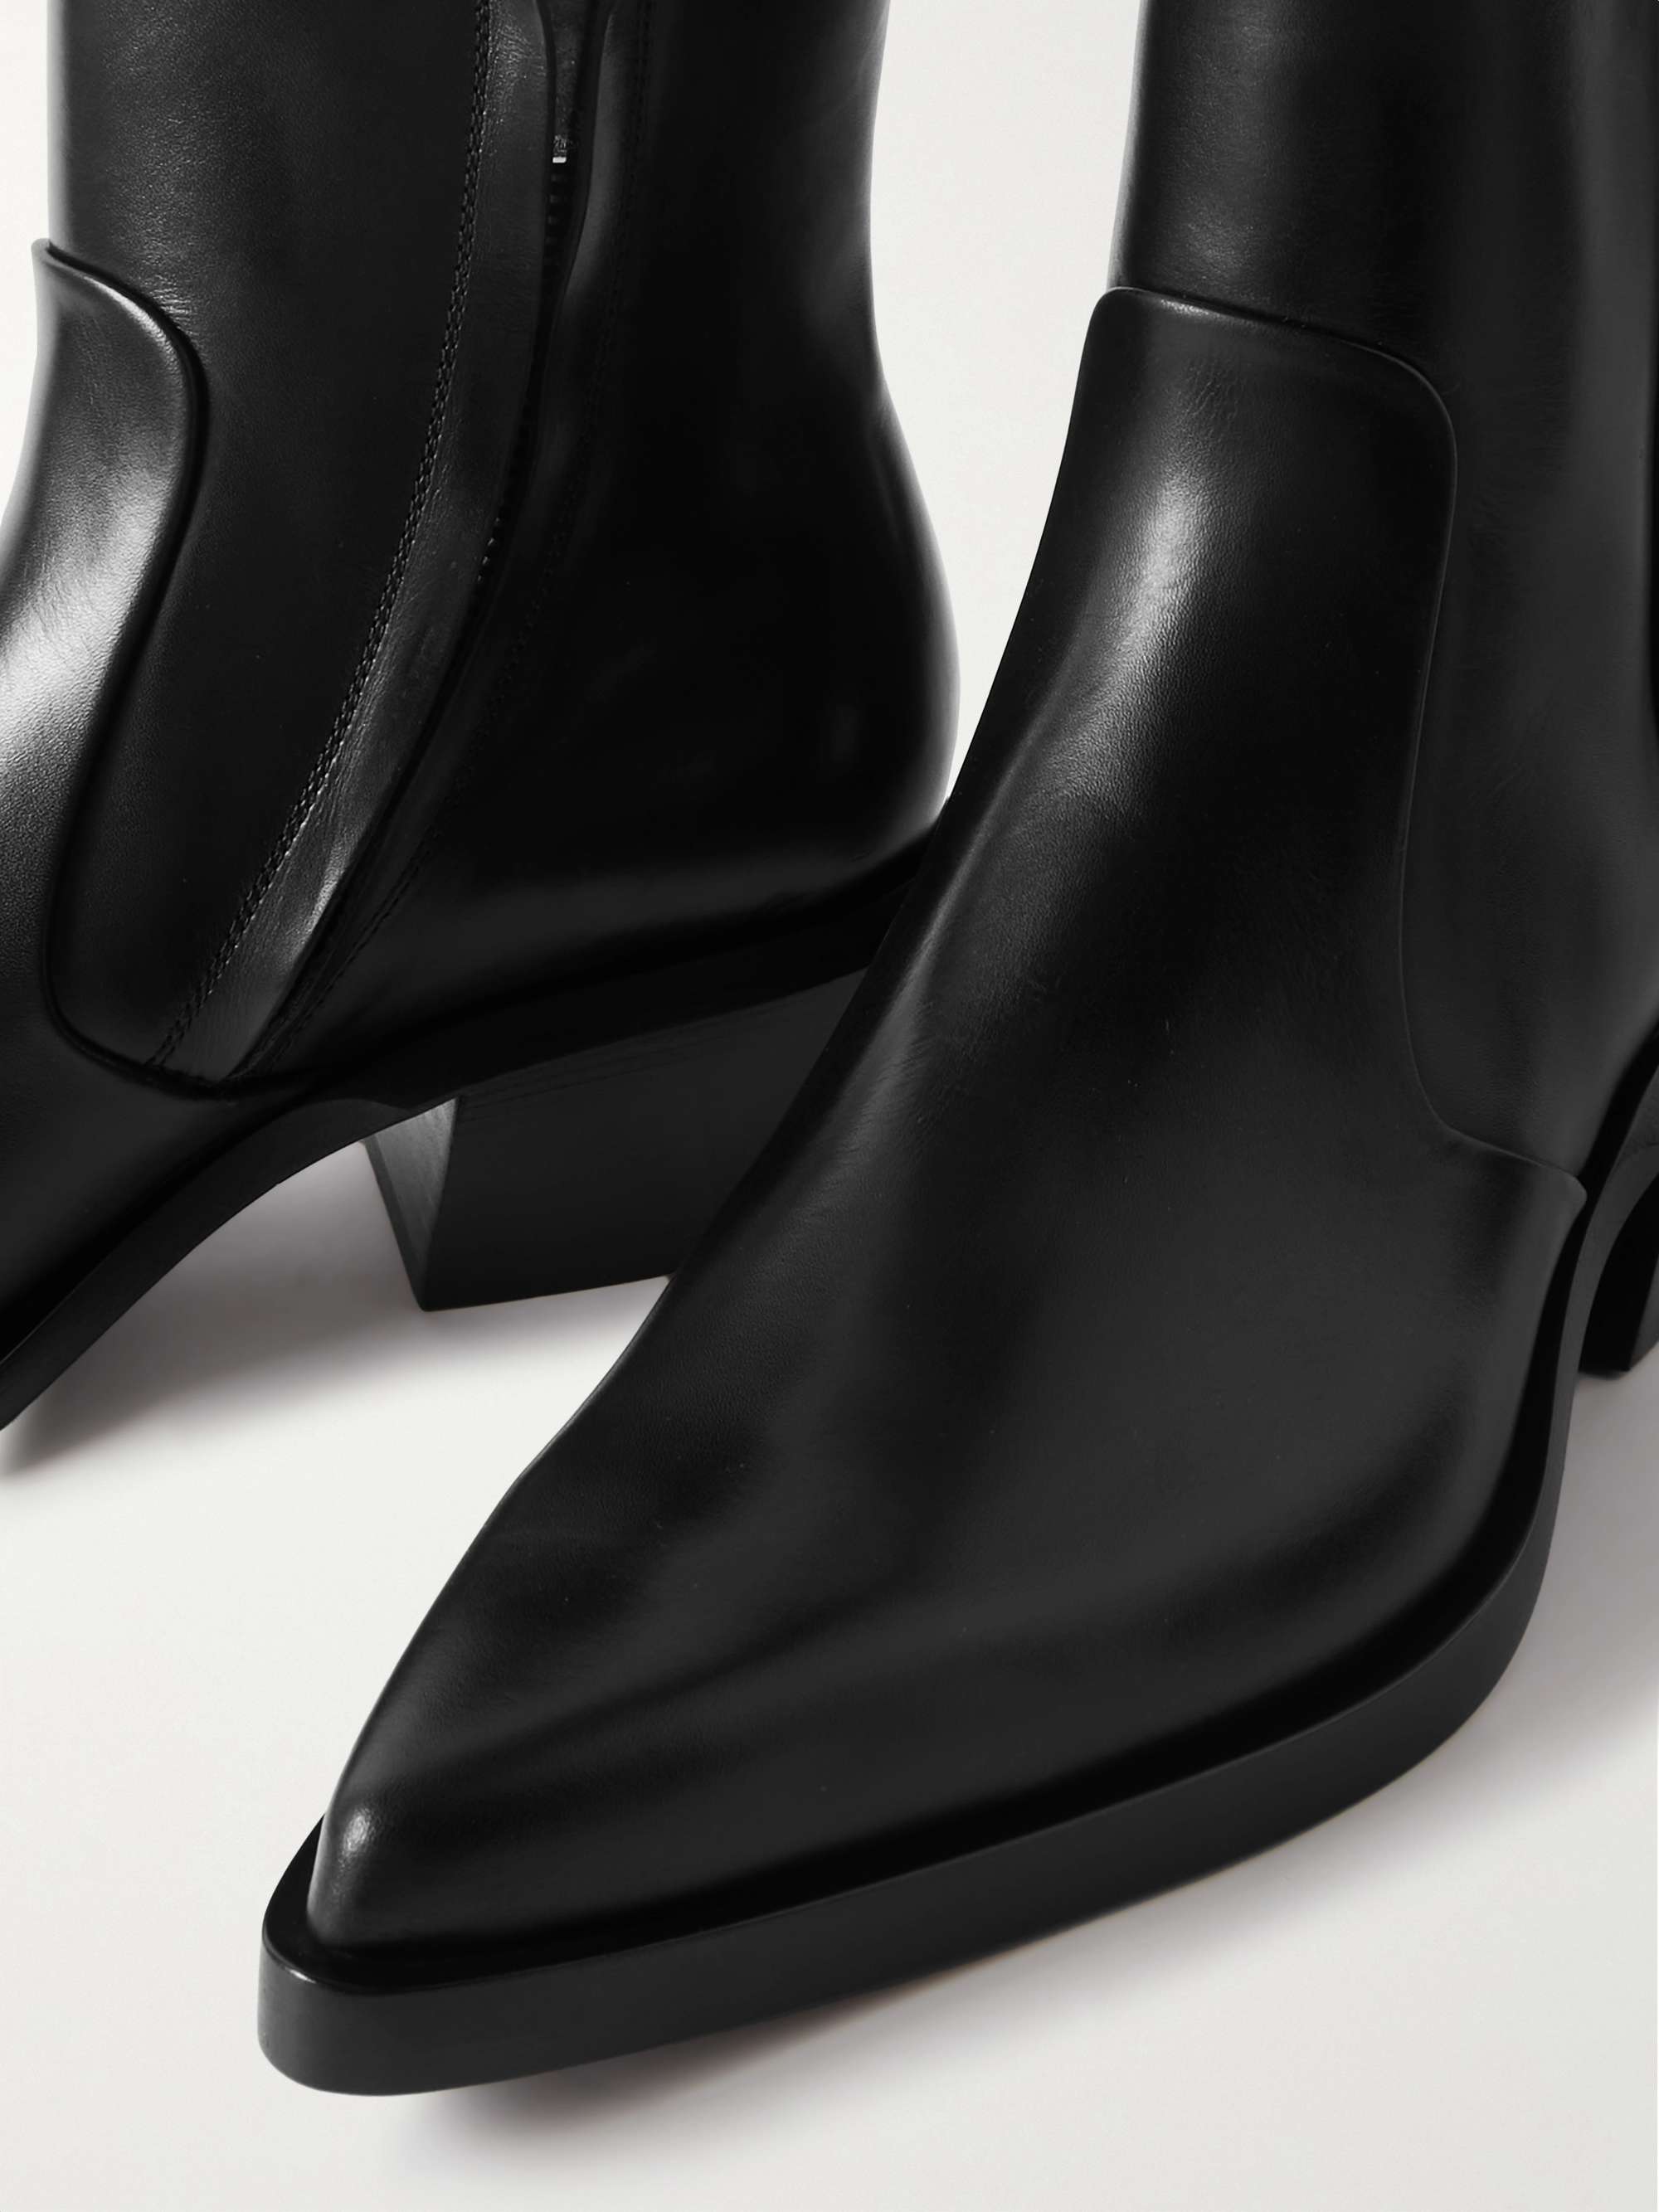 OFF-WHITE Texan Leather Boots for Men | MR PORTER